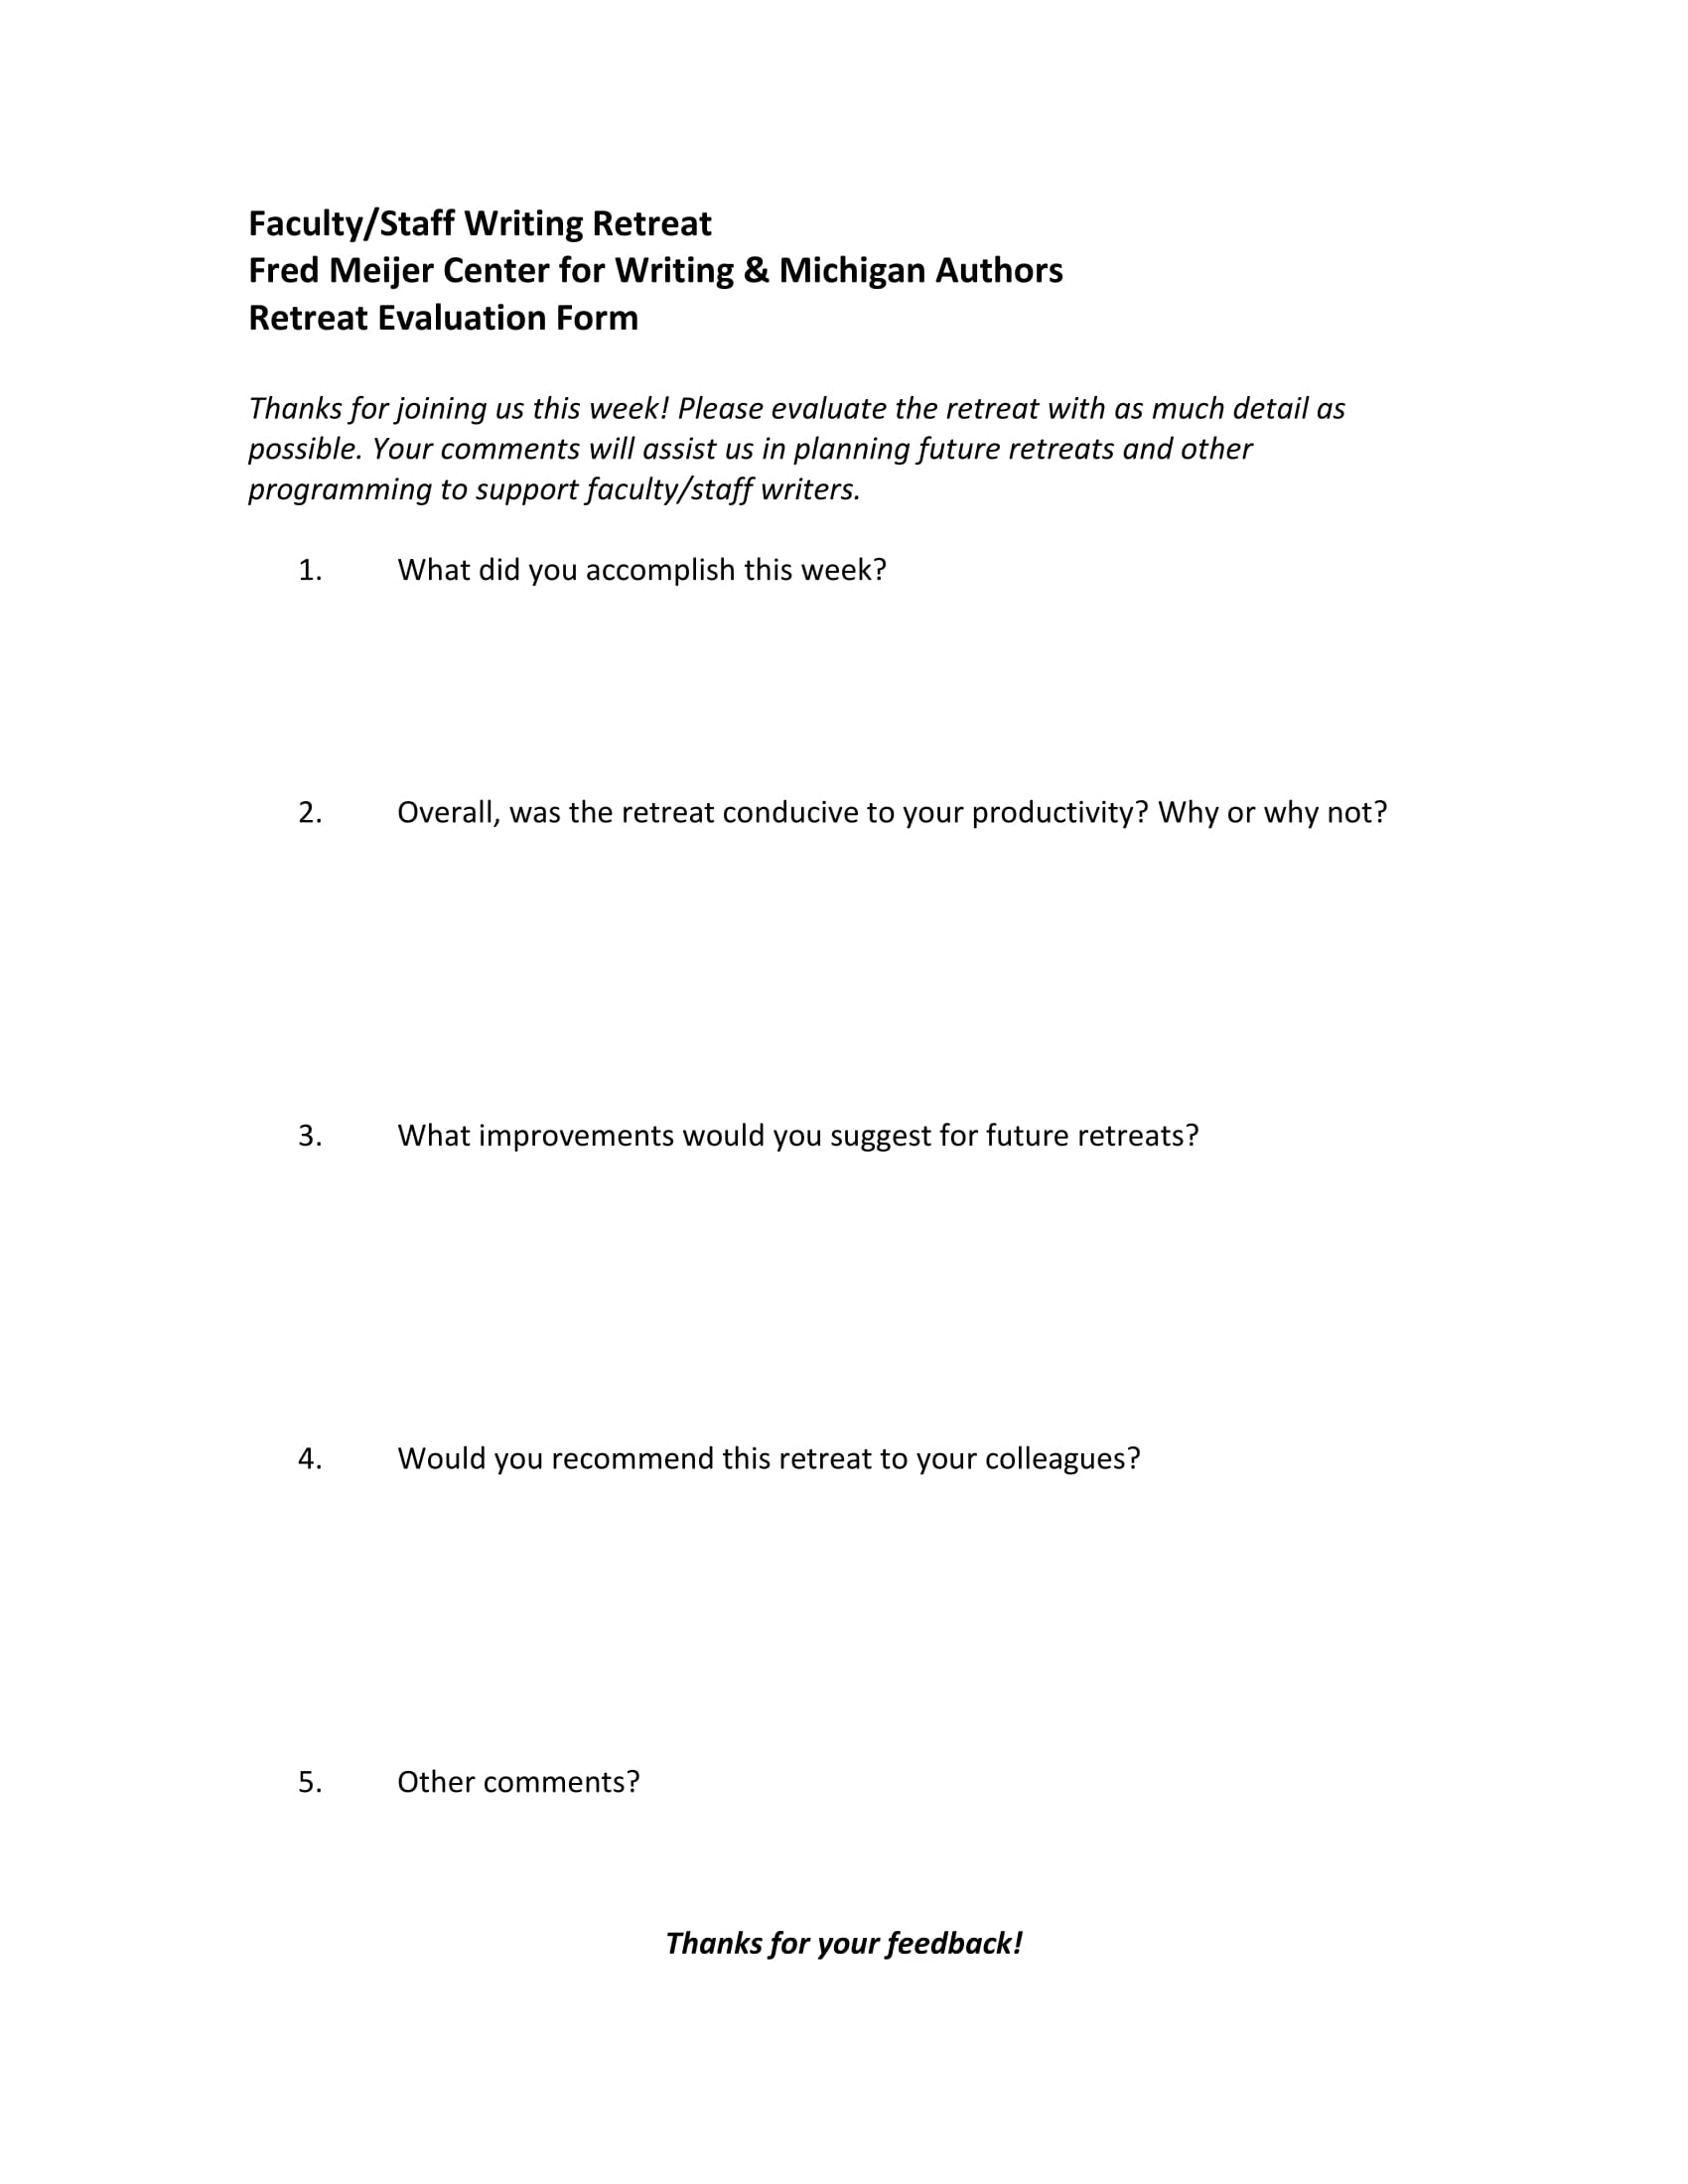 faculty writing retreat evaluation form 1